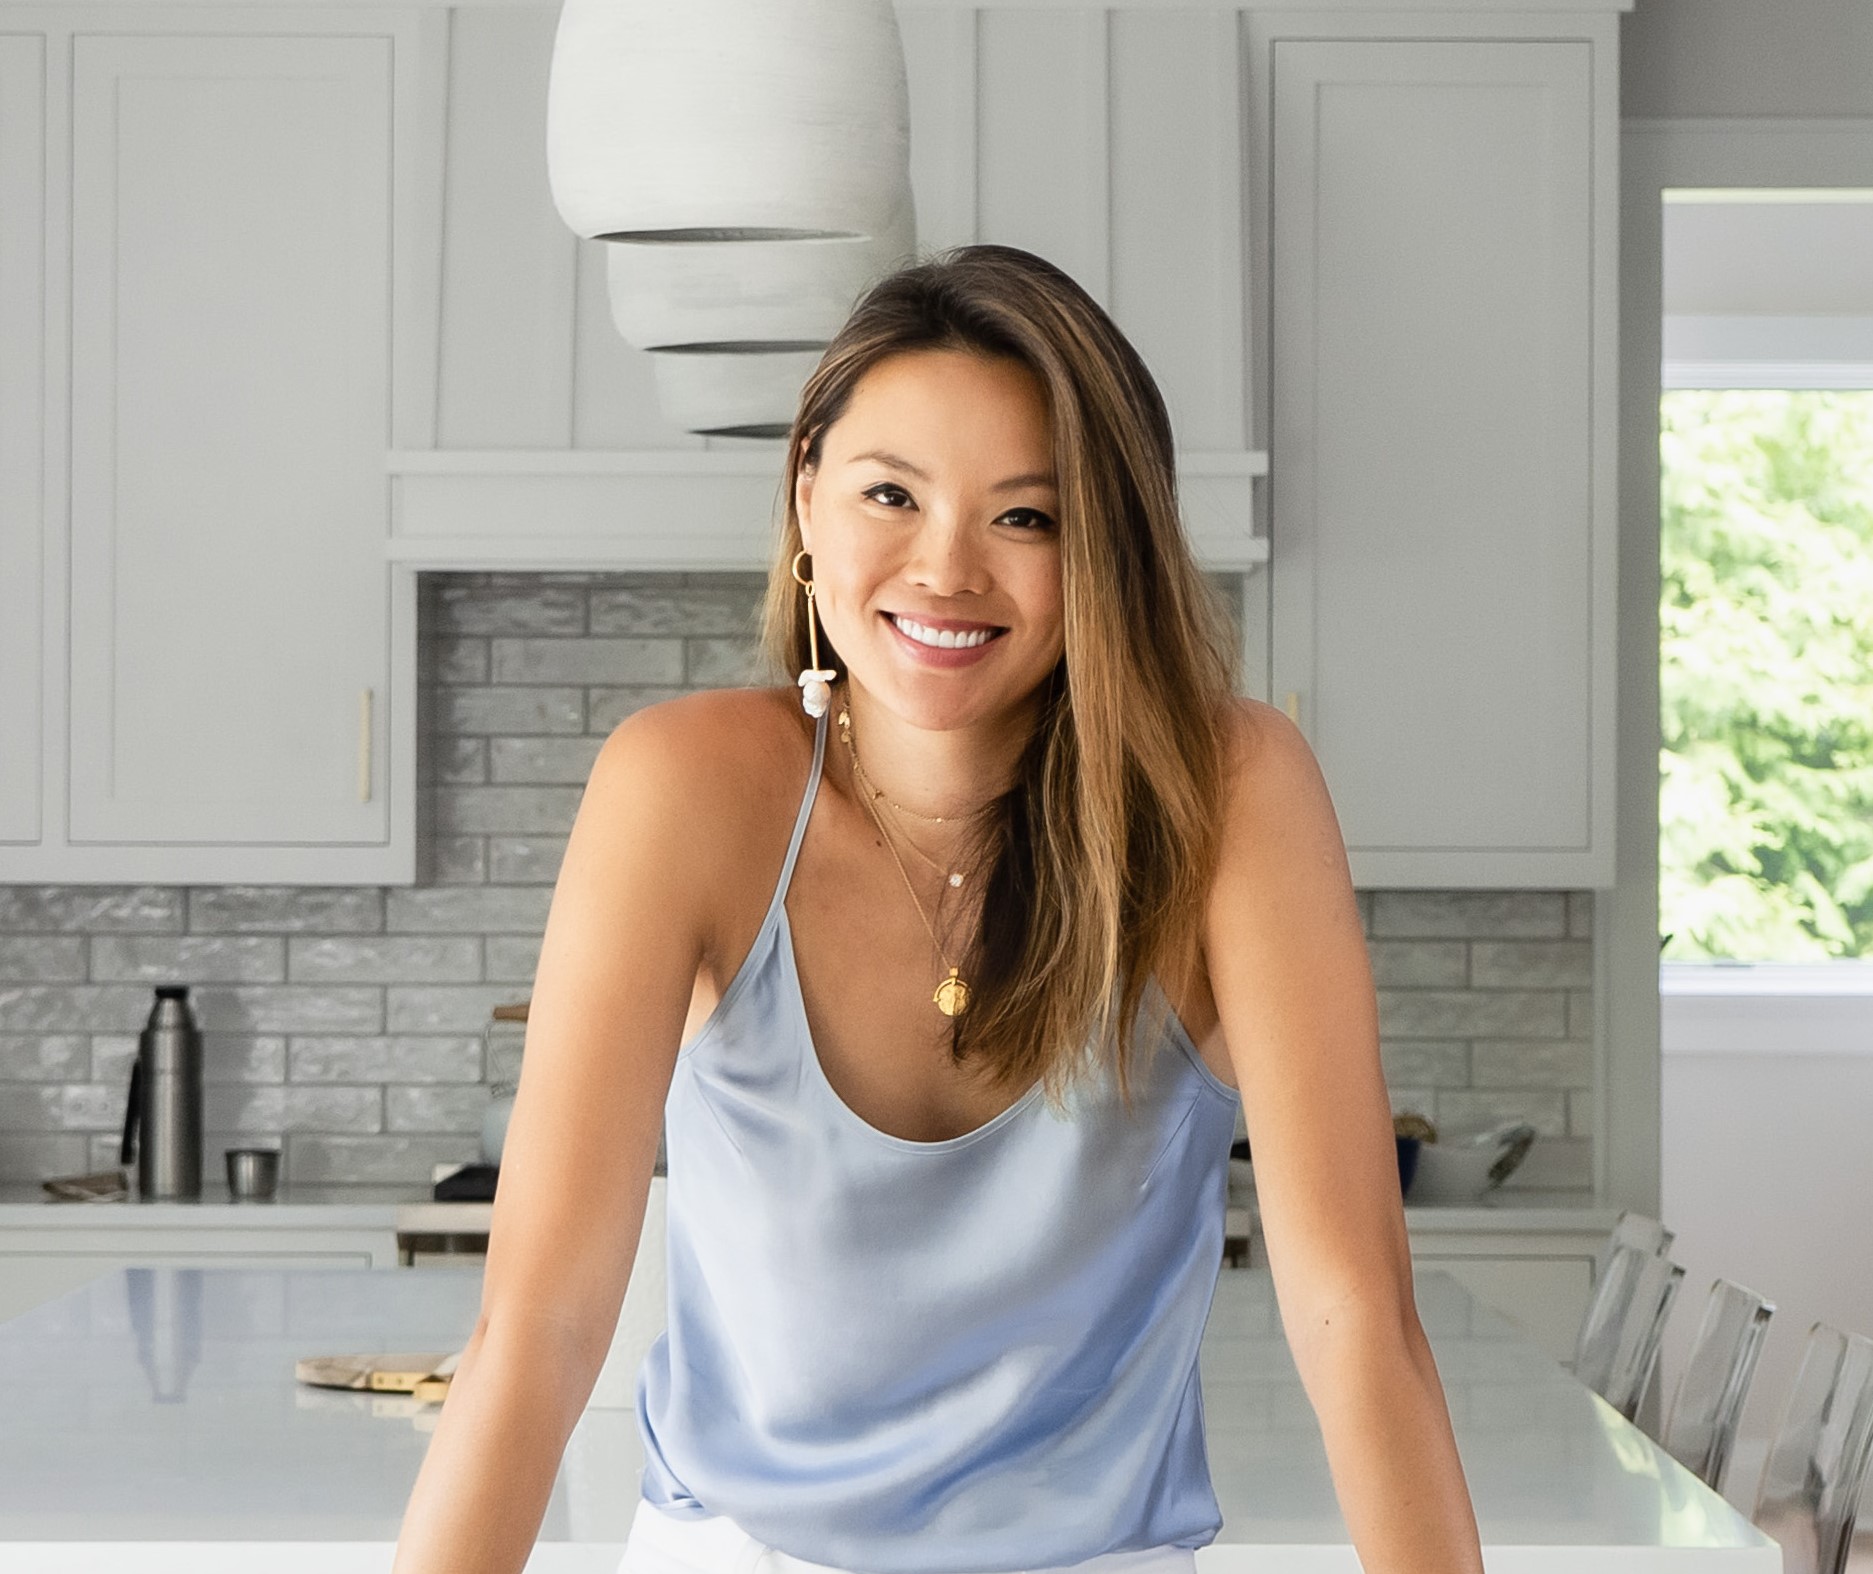 A picture of Kathy Kuo in a kitchen with a blue top on